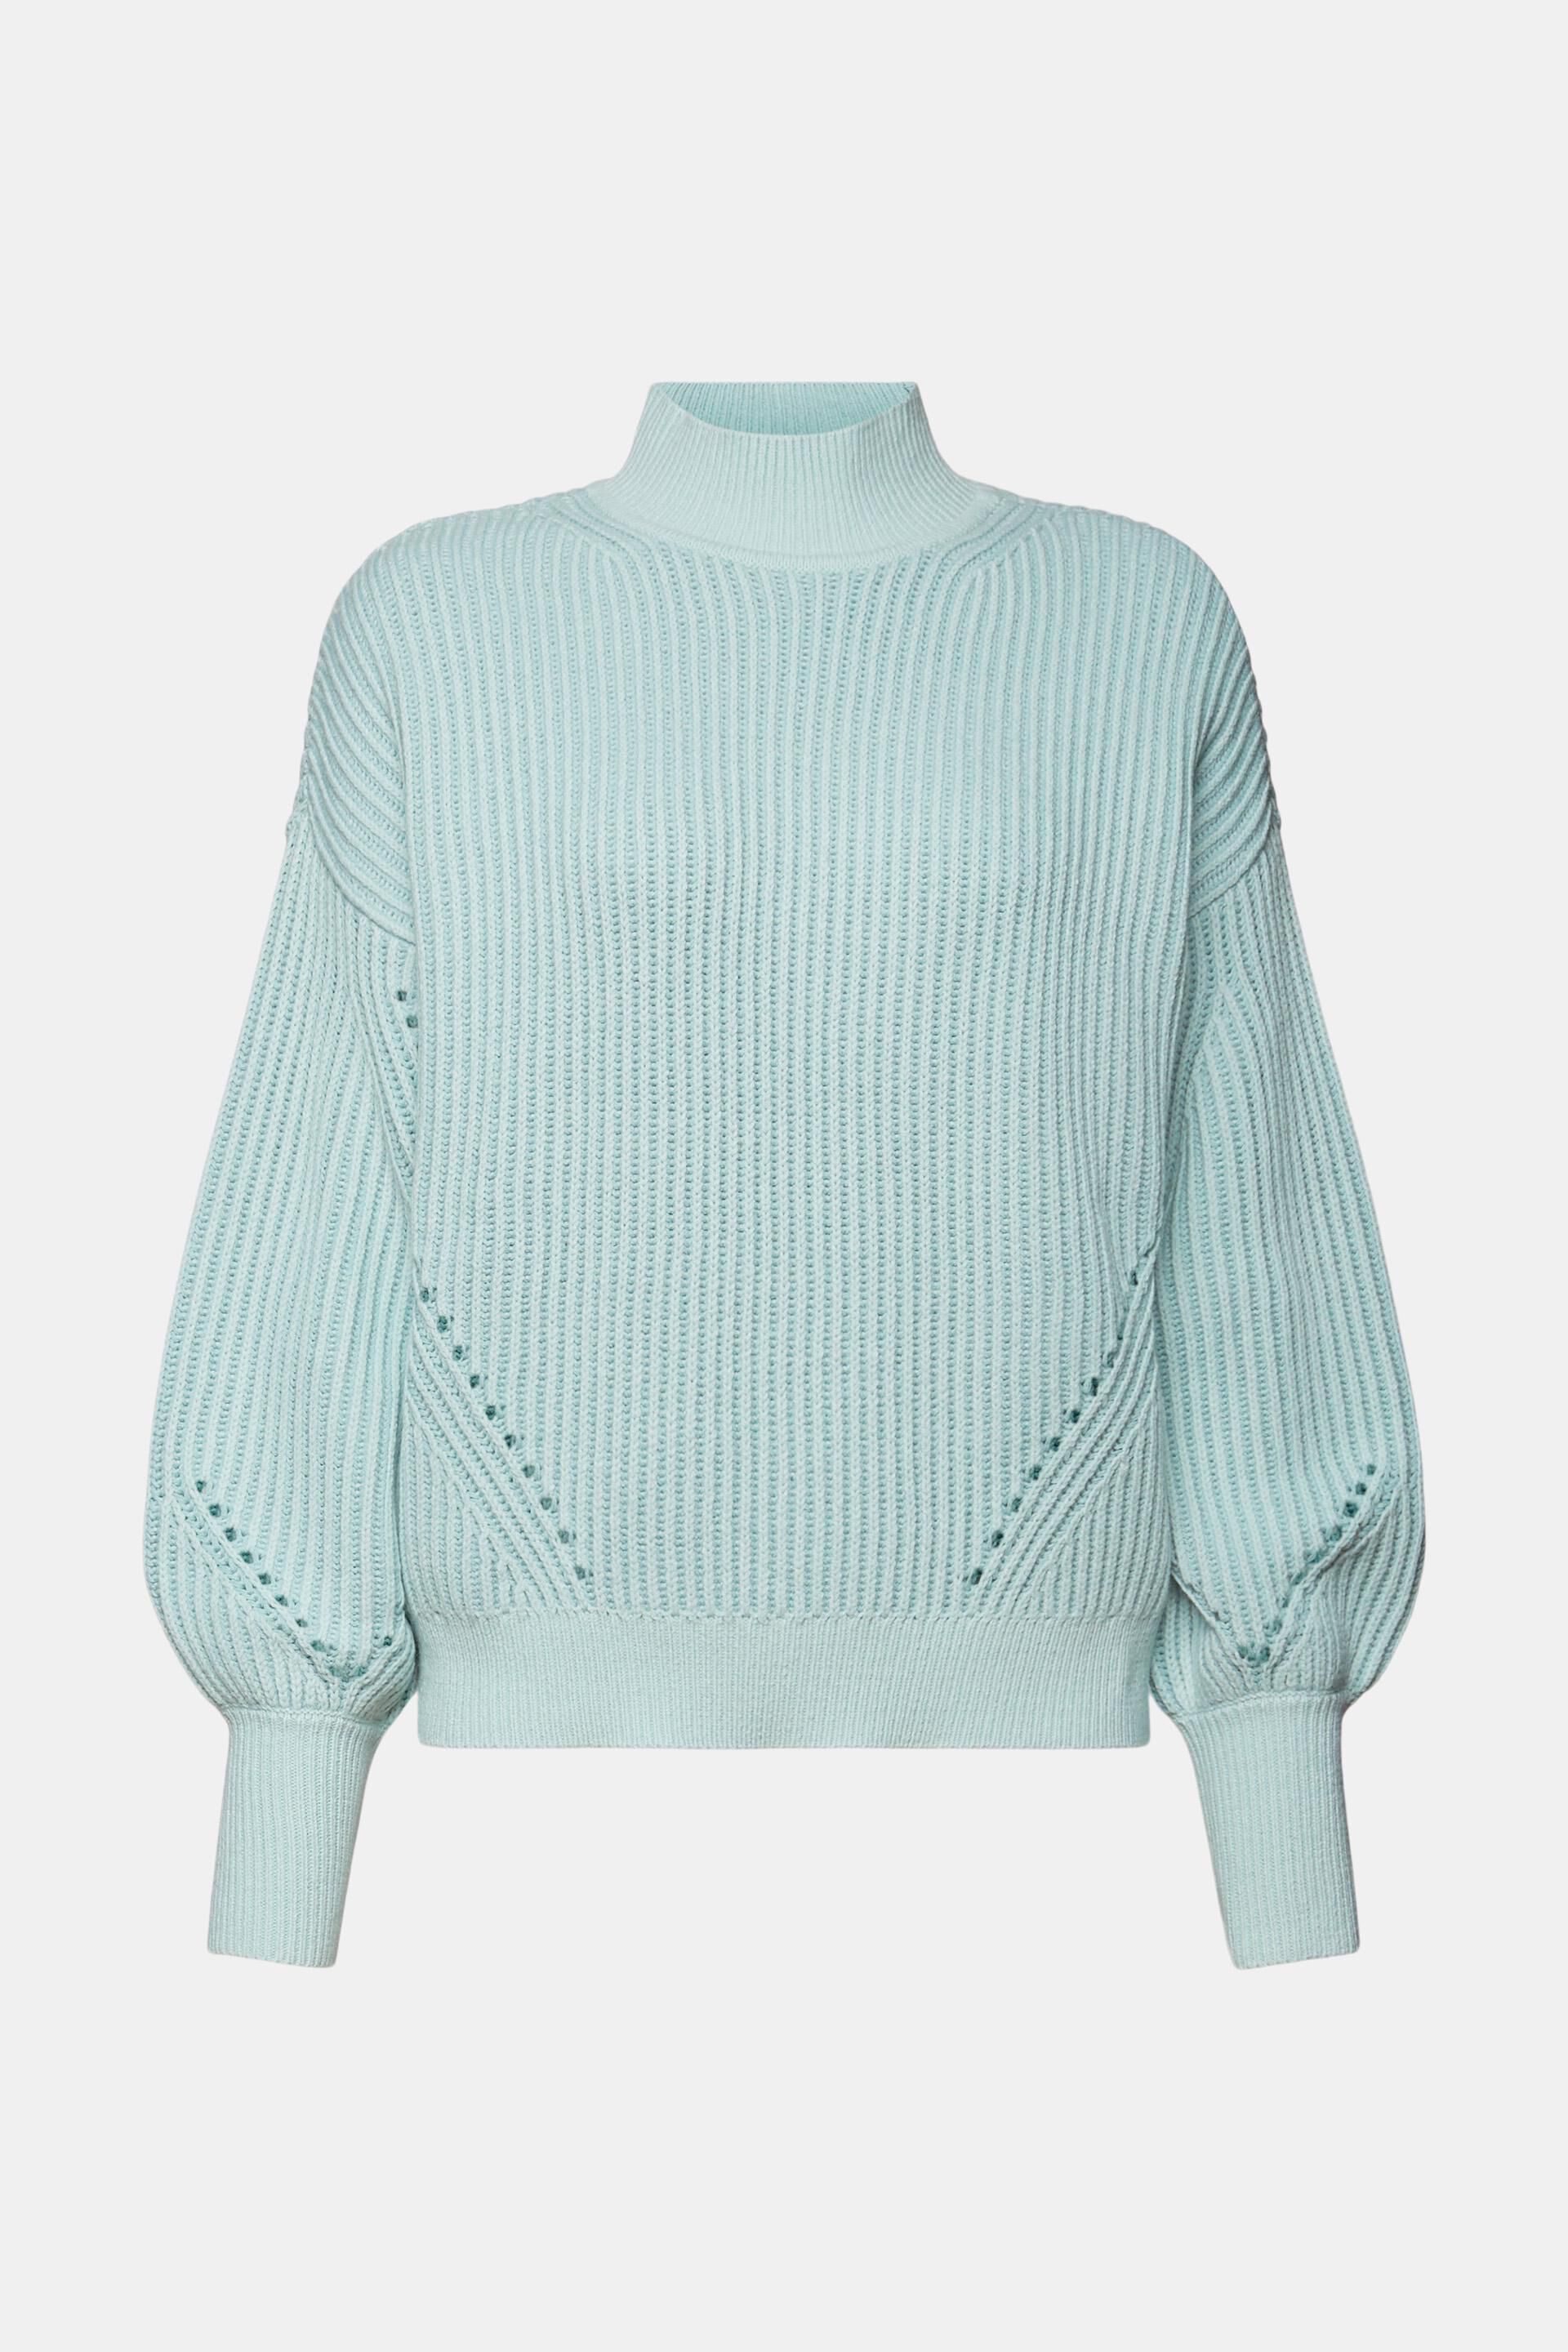 Mock Neck Rib-Knit Sweater at our online shop - ESPRIT